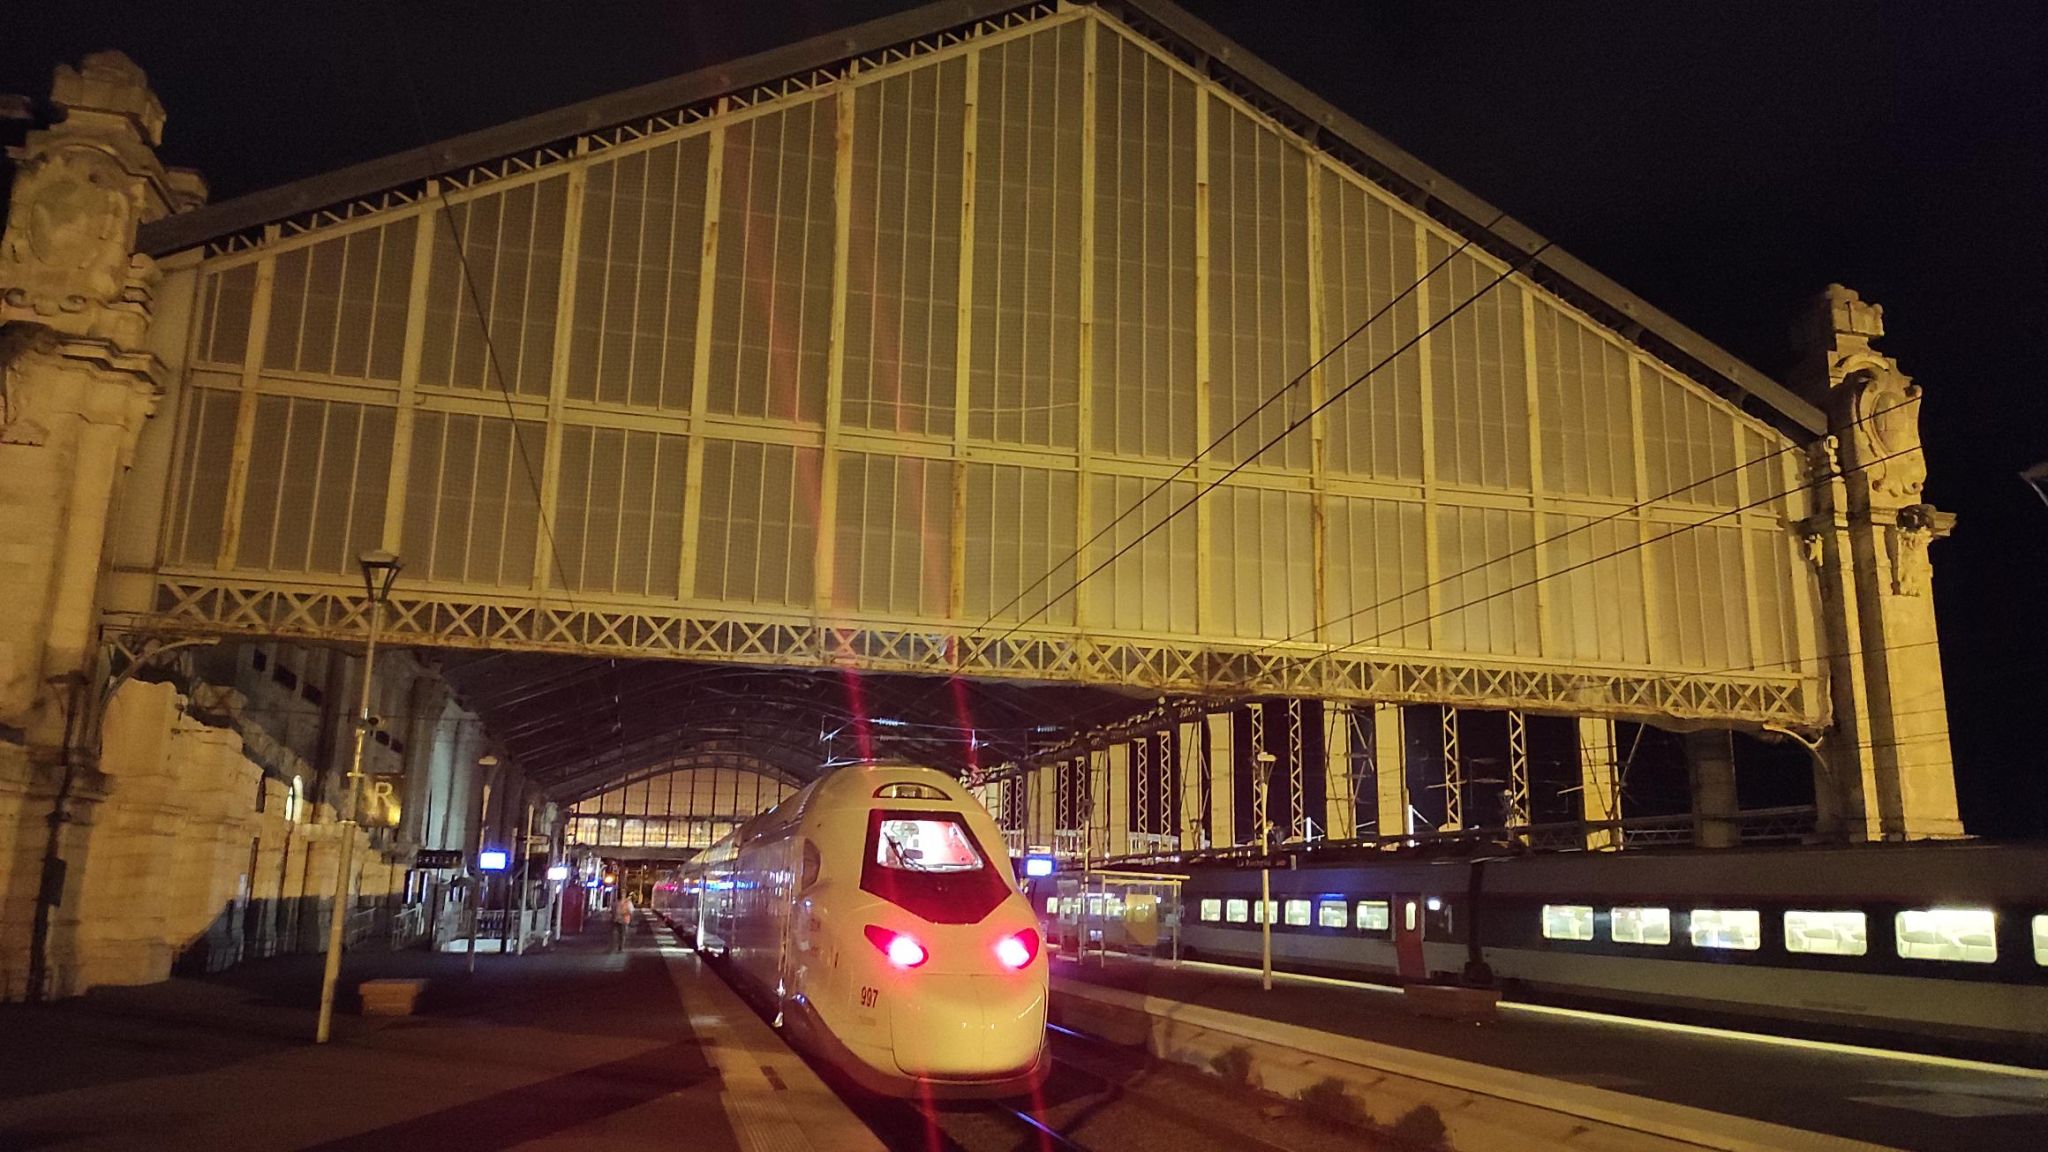 The Pre-Series 2 (PS2) trainset is officially the first TGV M trainset to run autonomously on the French rail network. (Photo: David Goeres, Director of TGV M projects at SNCF on LinkedIn)